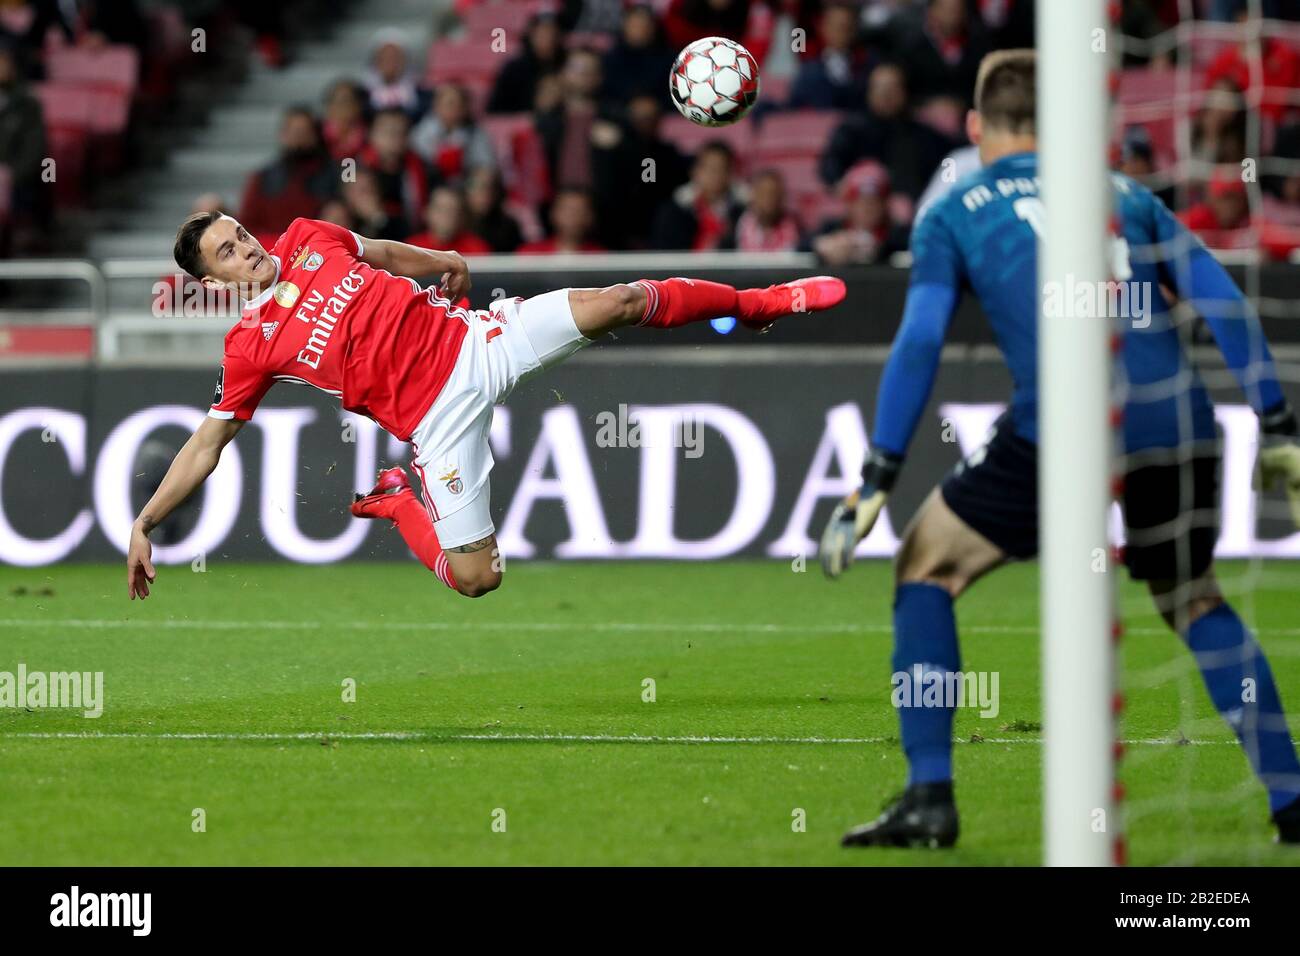 Lisbon, Portugal. 2nd Mar, 2020. Franco Cervi of SL Benfica (L) vies with Mateus Pasinato of Moreirense FC during the Primeira Liga football match between SL Benfica and Moreirense FC in Lisbon, Portugal, on March 2, 2020. Credit: Petro Fiuza/Xinhua/Alamy Live News Stock Photo